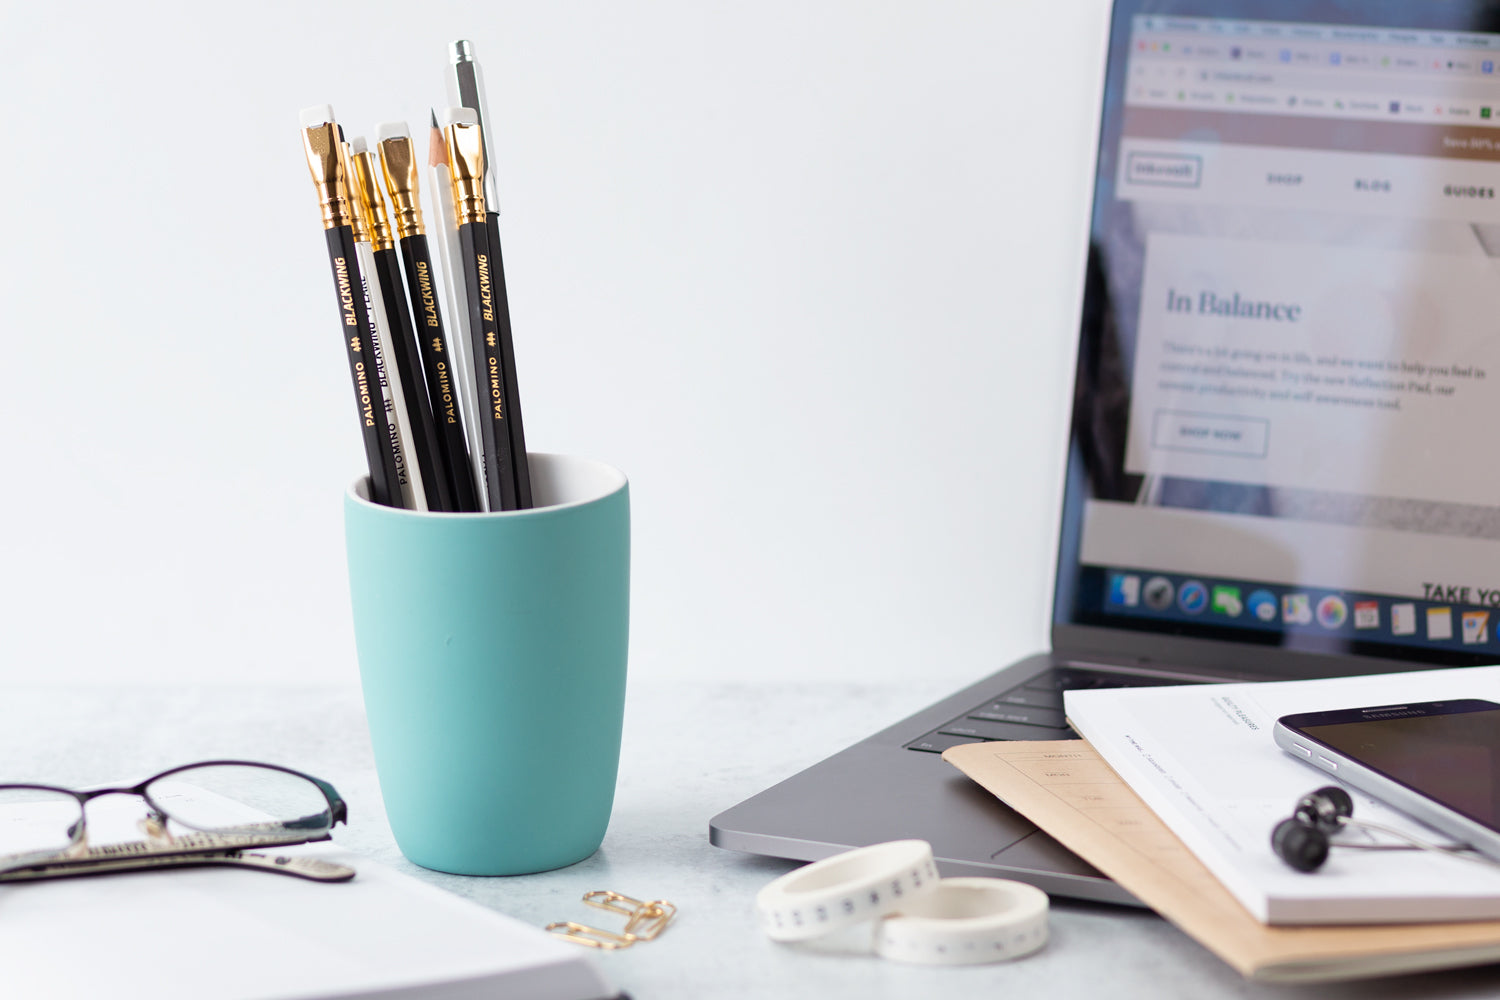 The 9 Best Desktop Organizers to Simplify Your Space and Life